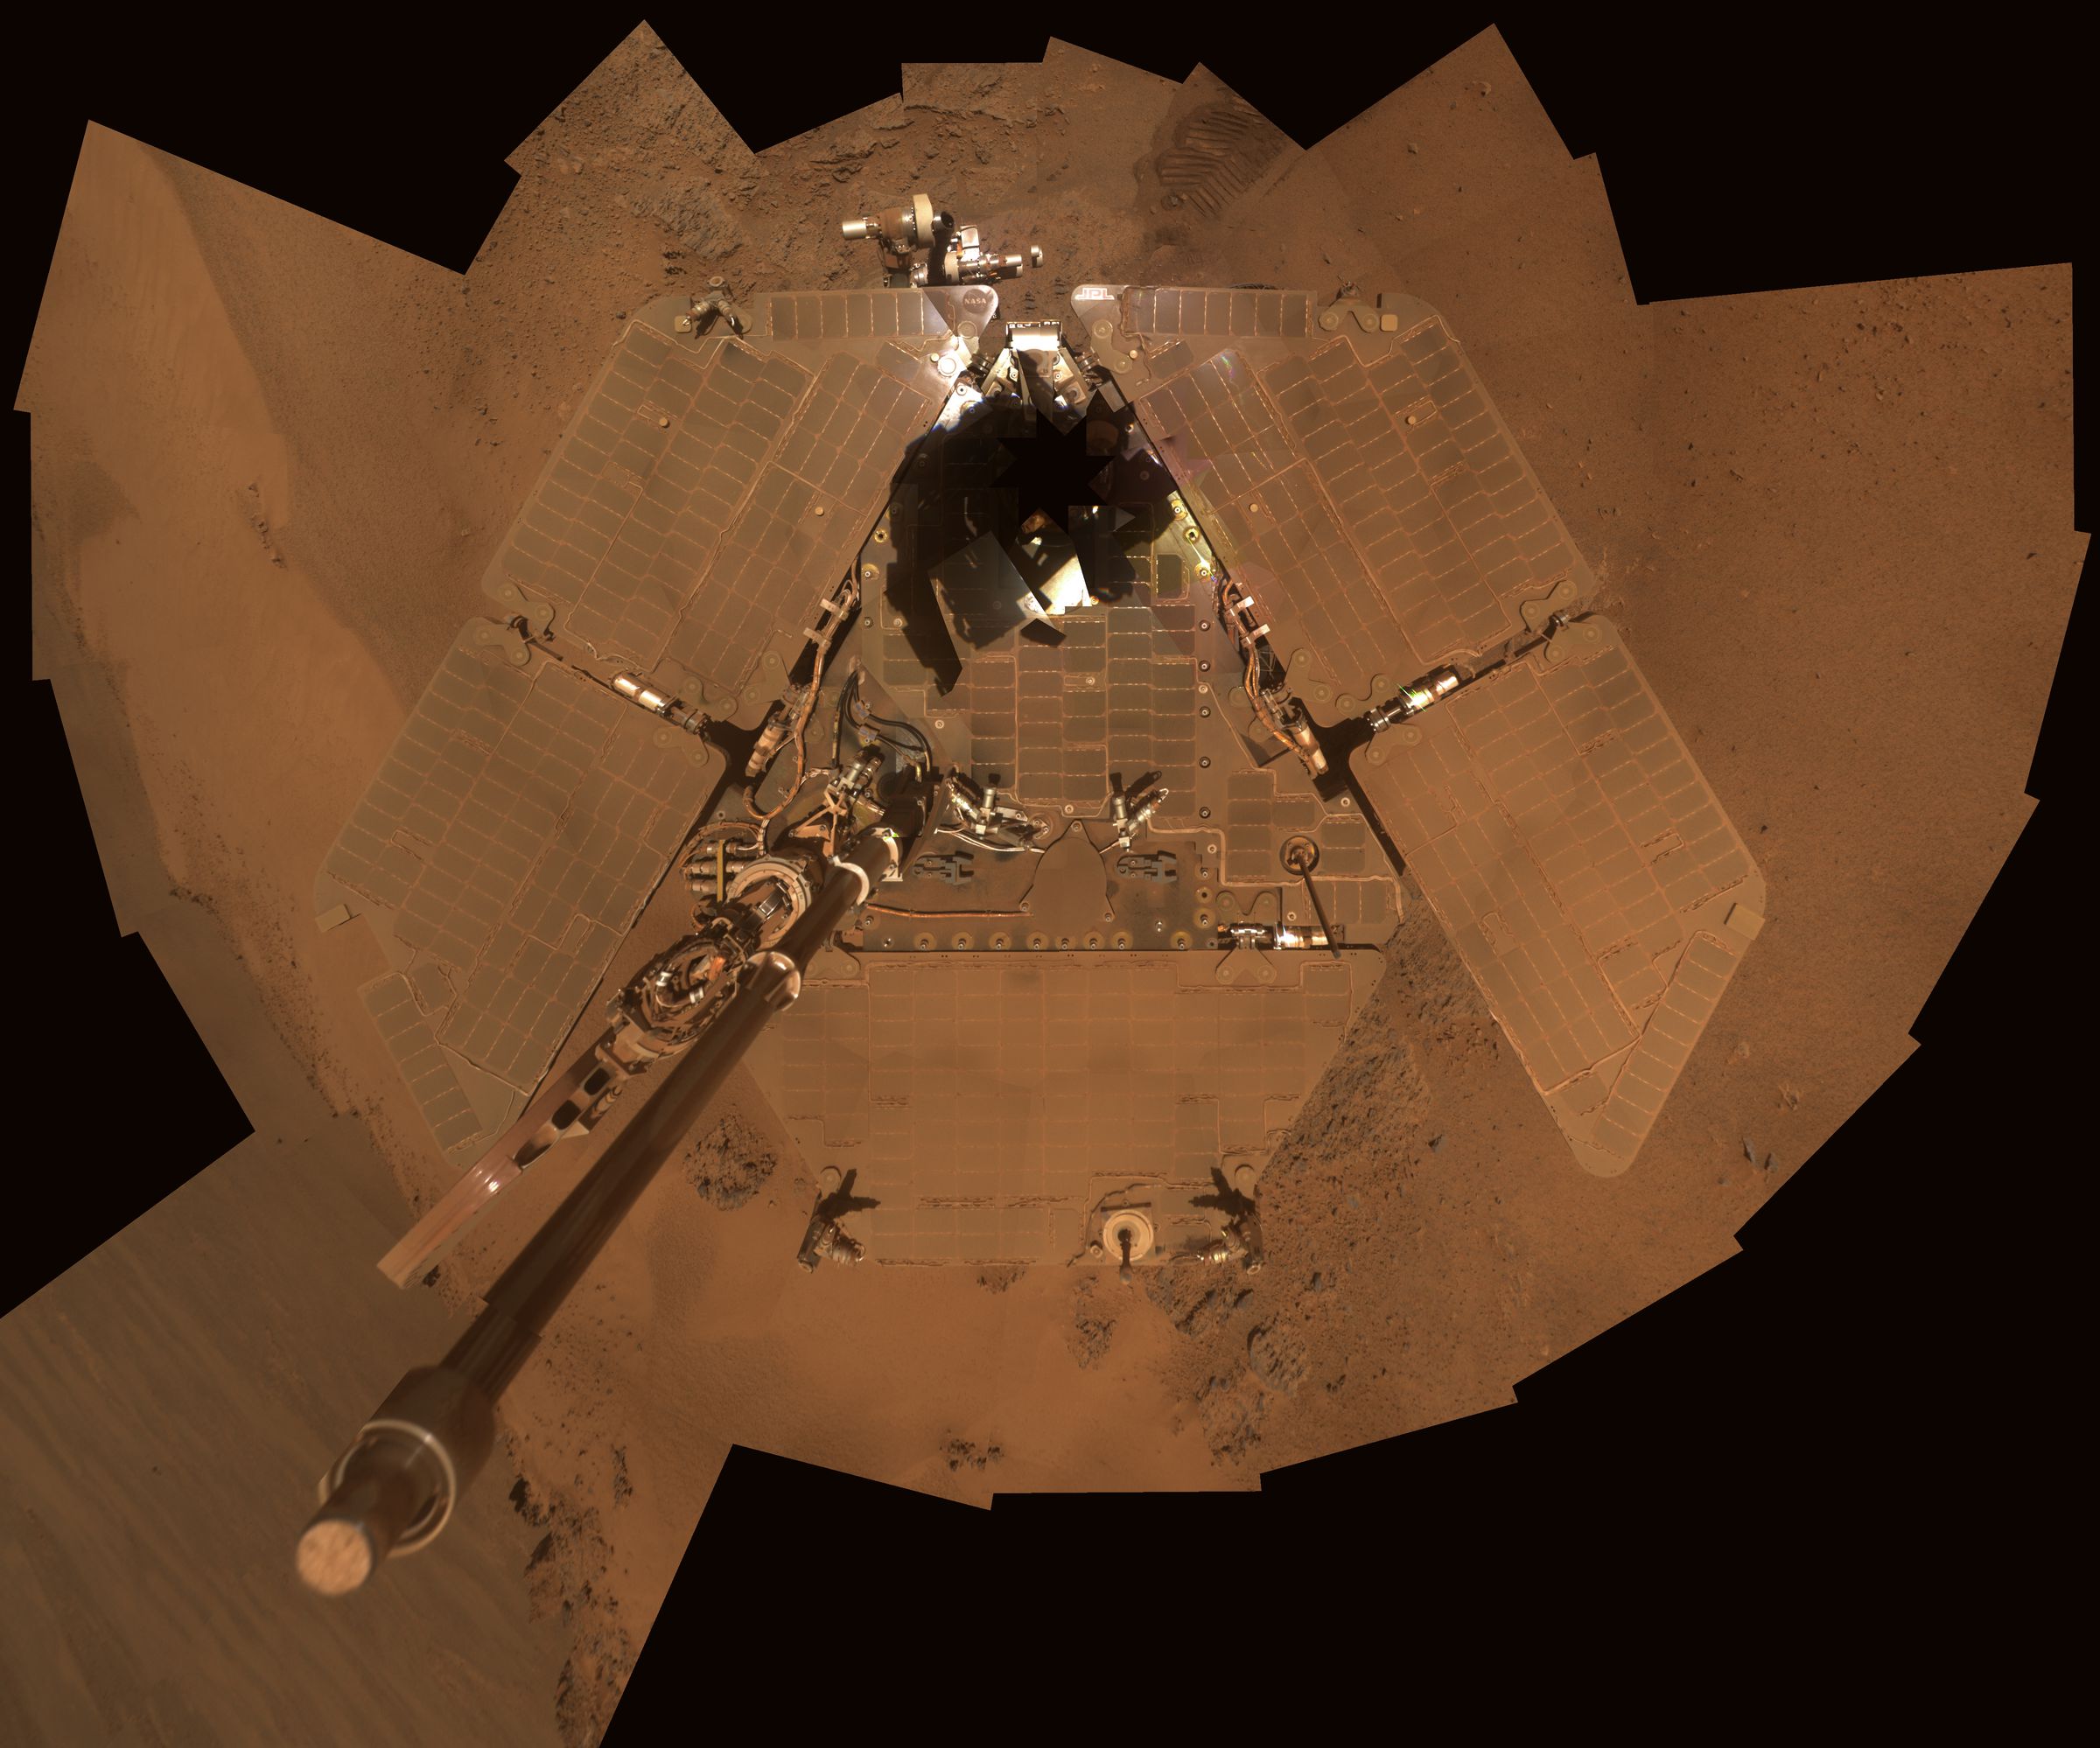 A selfie taken in 2011 shows dust coating the rover’s solar panels. During dust storms, the amount of power the rover could generate was severely reduced, and engineers had to wait for wind to clear the dust from the panels